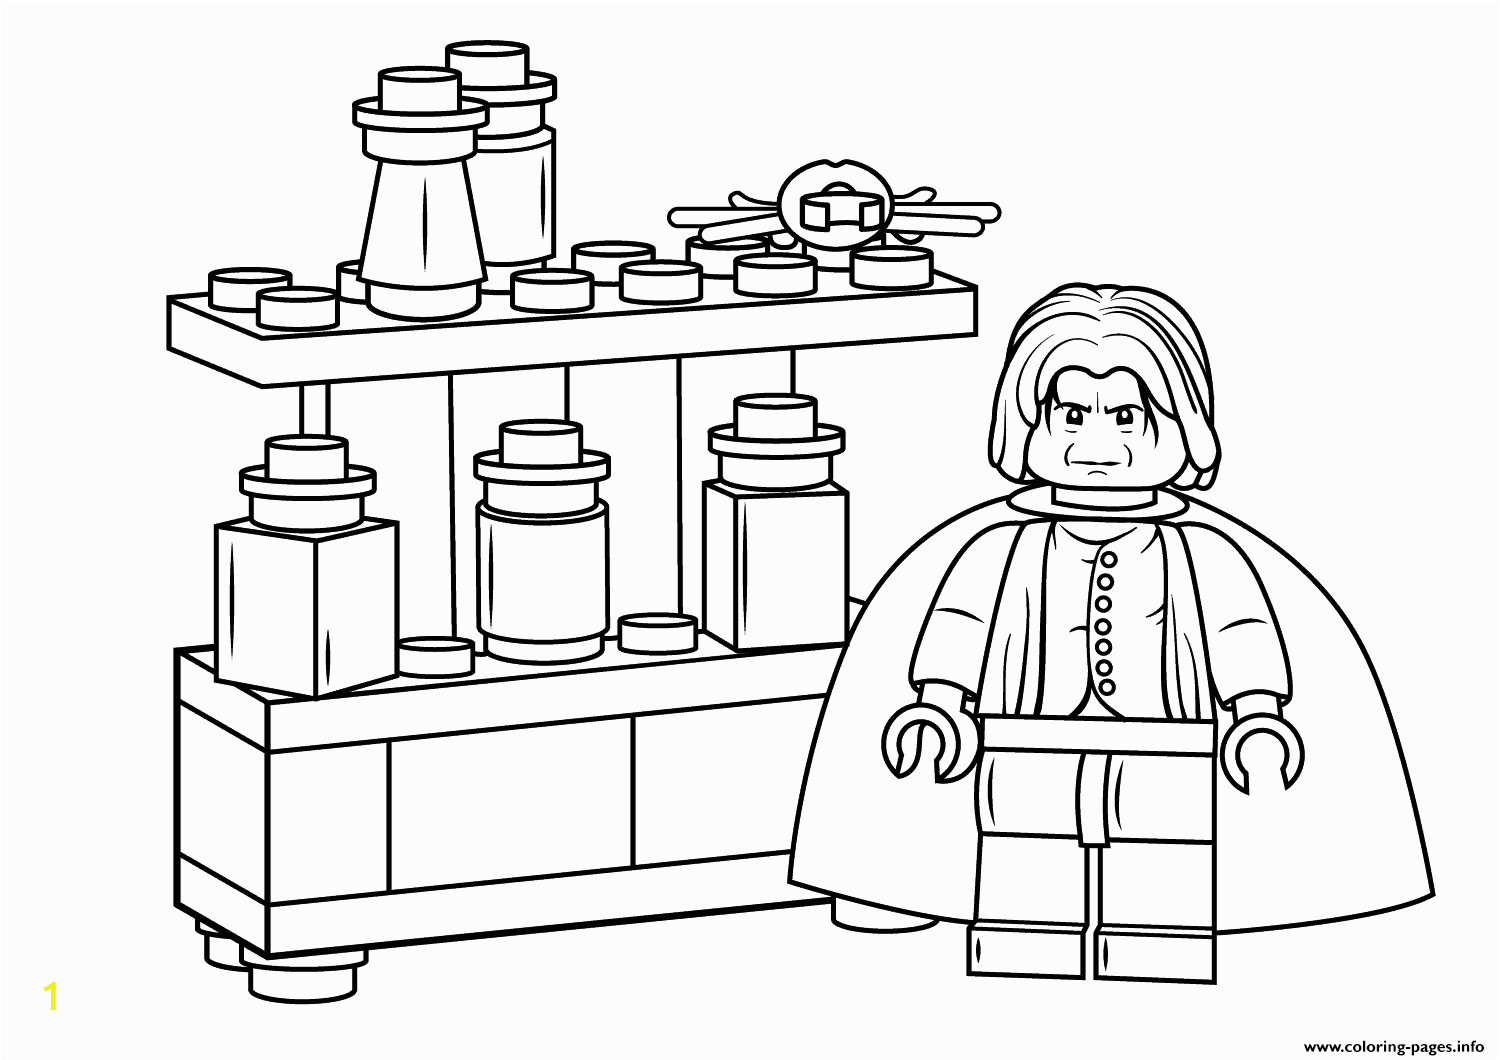 Lego Harry Potter Coloring Pages to Print Lego Severus Snape Harry Potter Coloring Pages Printable